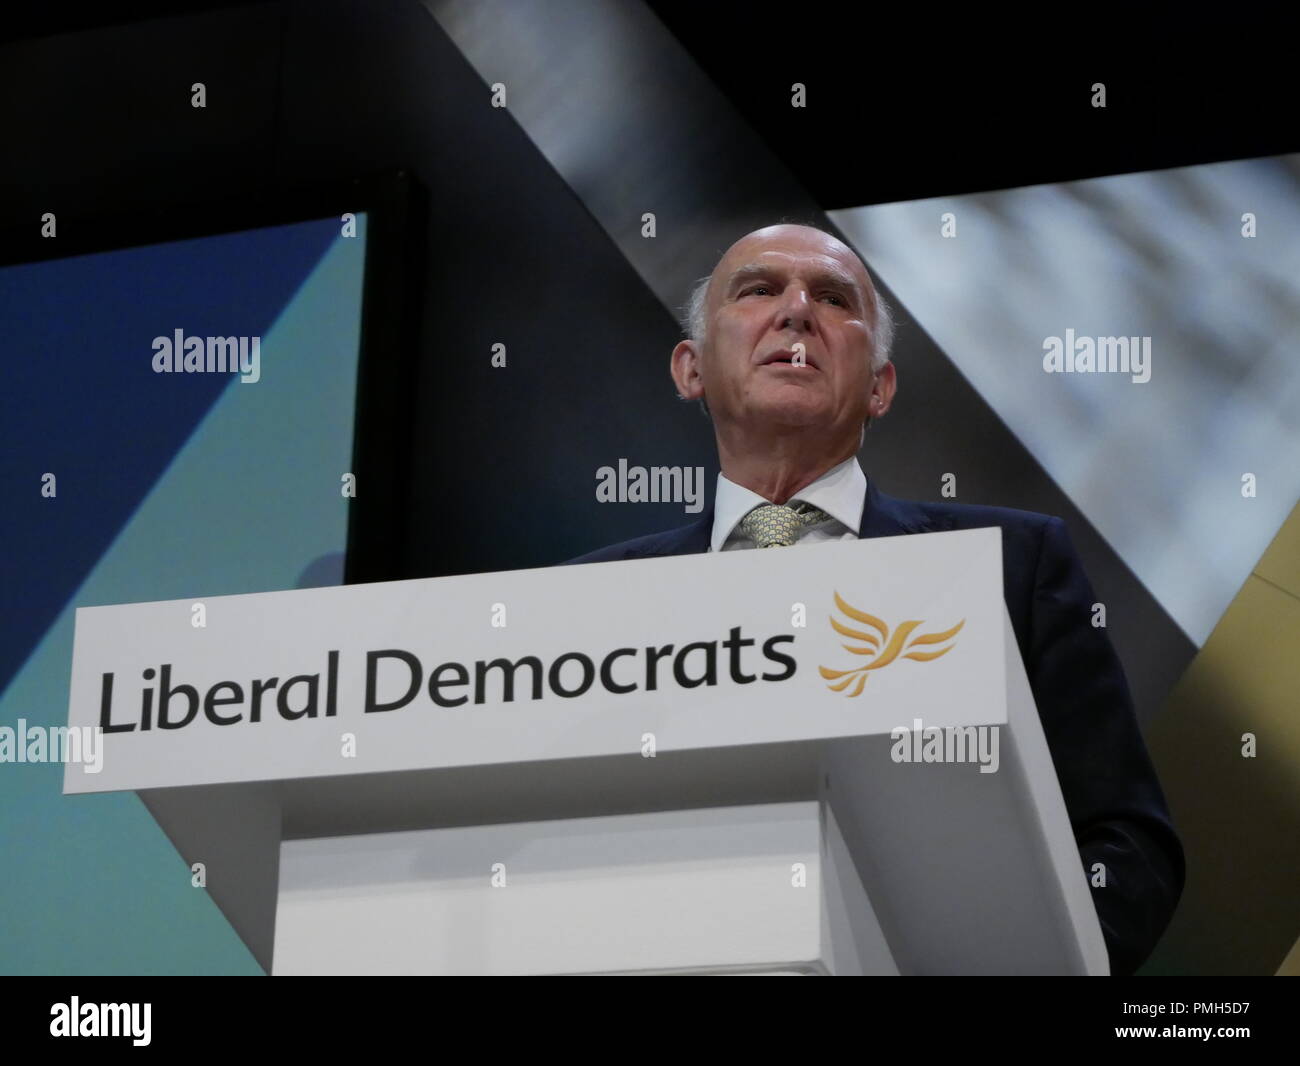 Brighton, UK. 18th September 2018. Lib Dem Leader Sir Vince Cable MP addresses Liberal Democrats at their Autumn 2018 Conference in Brighton. Stock Photo